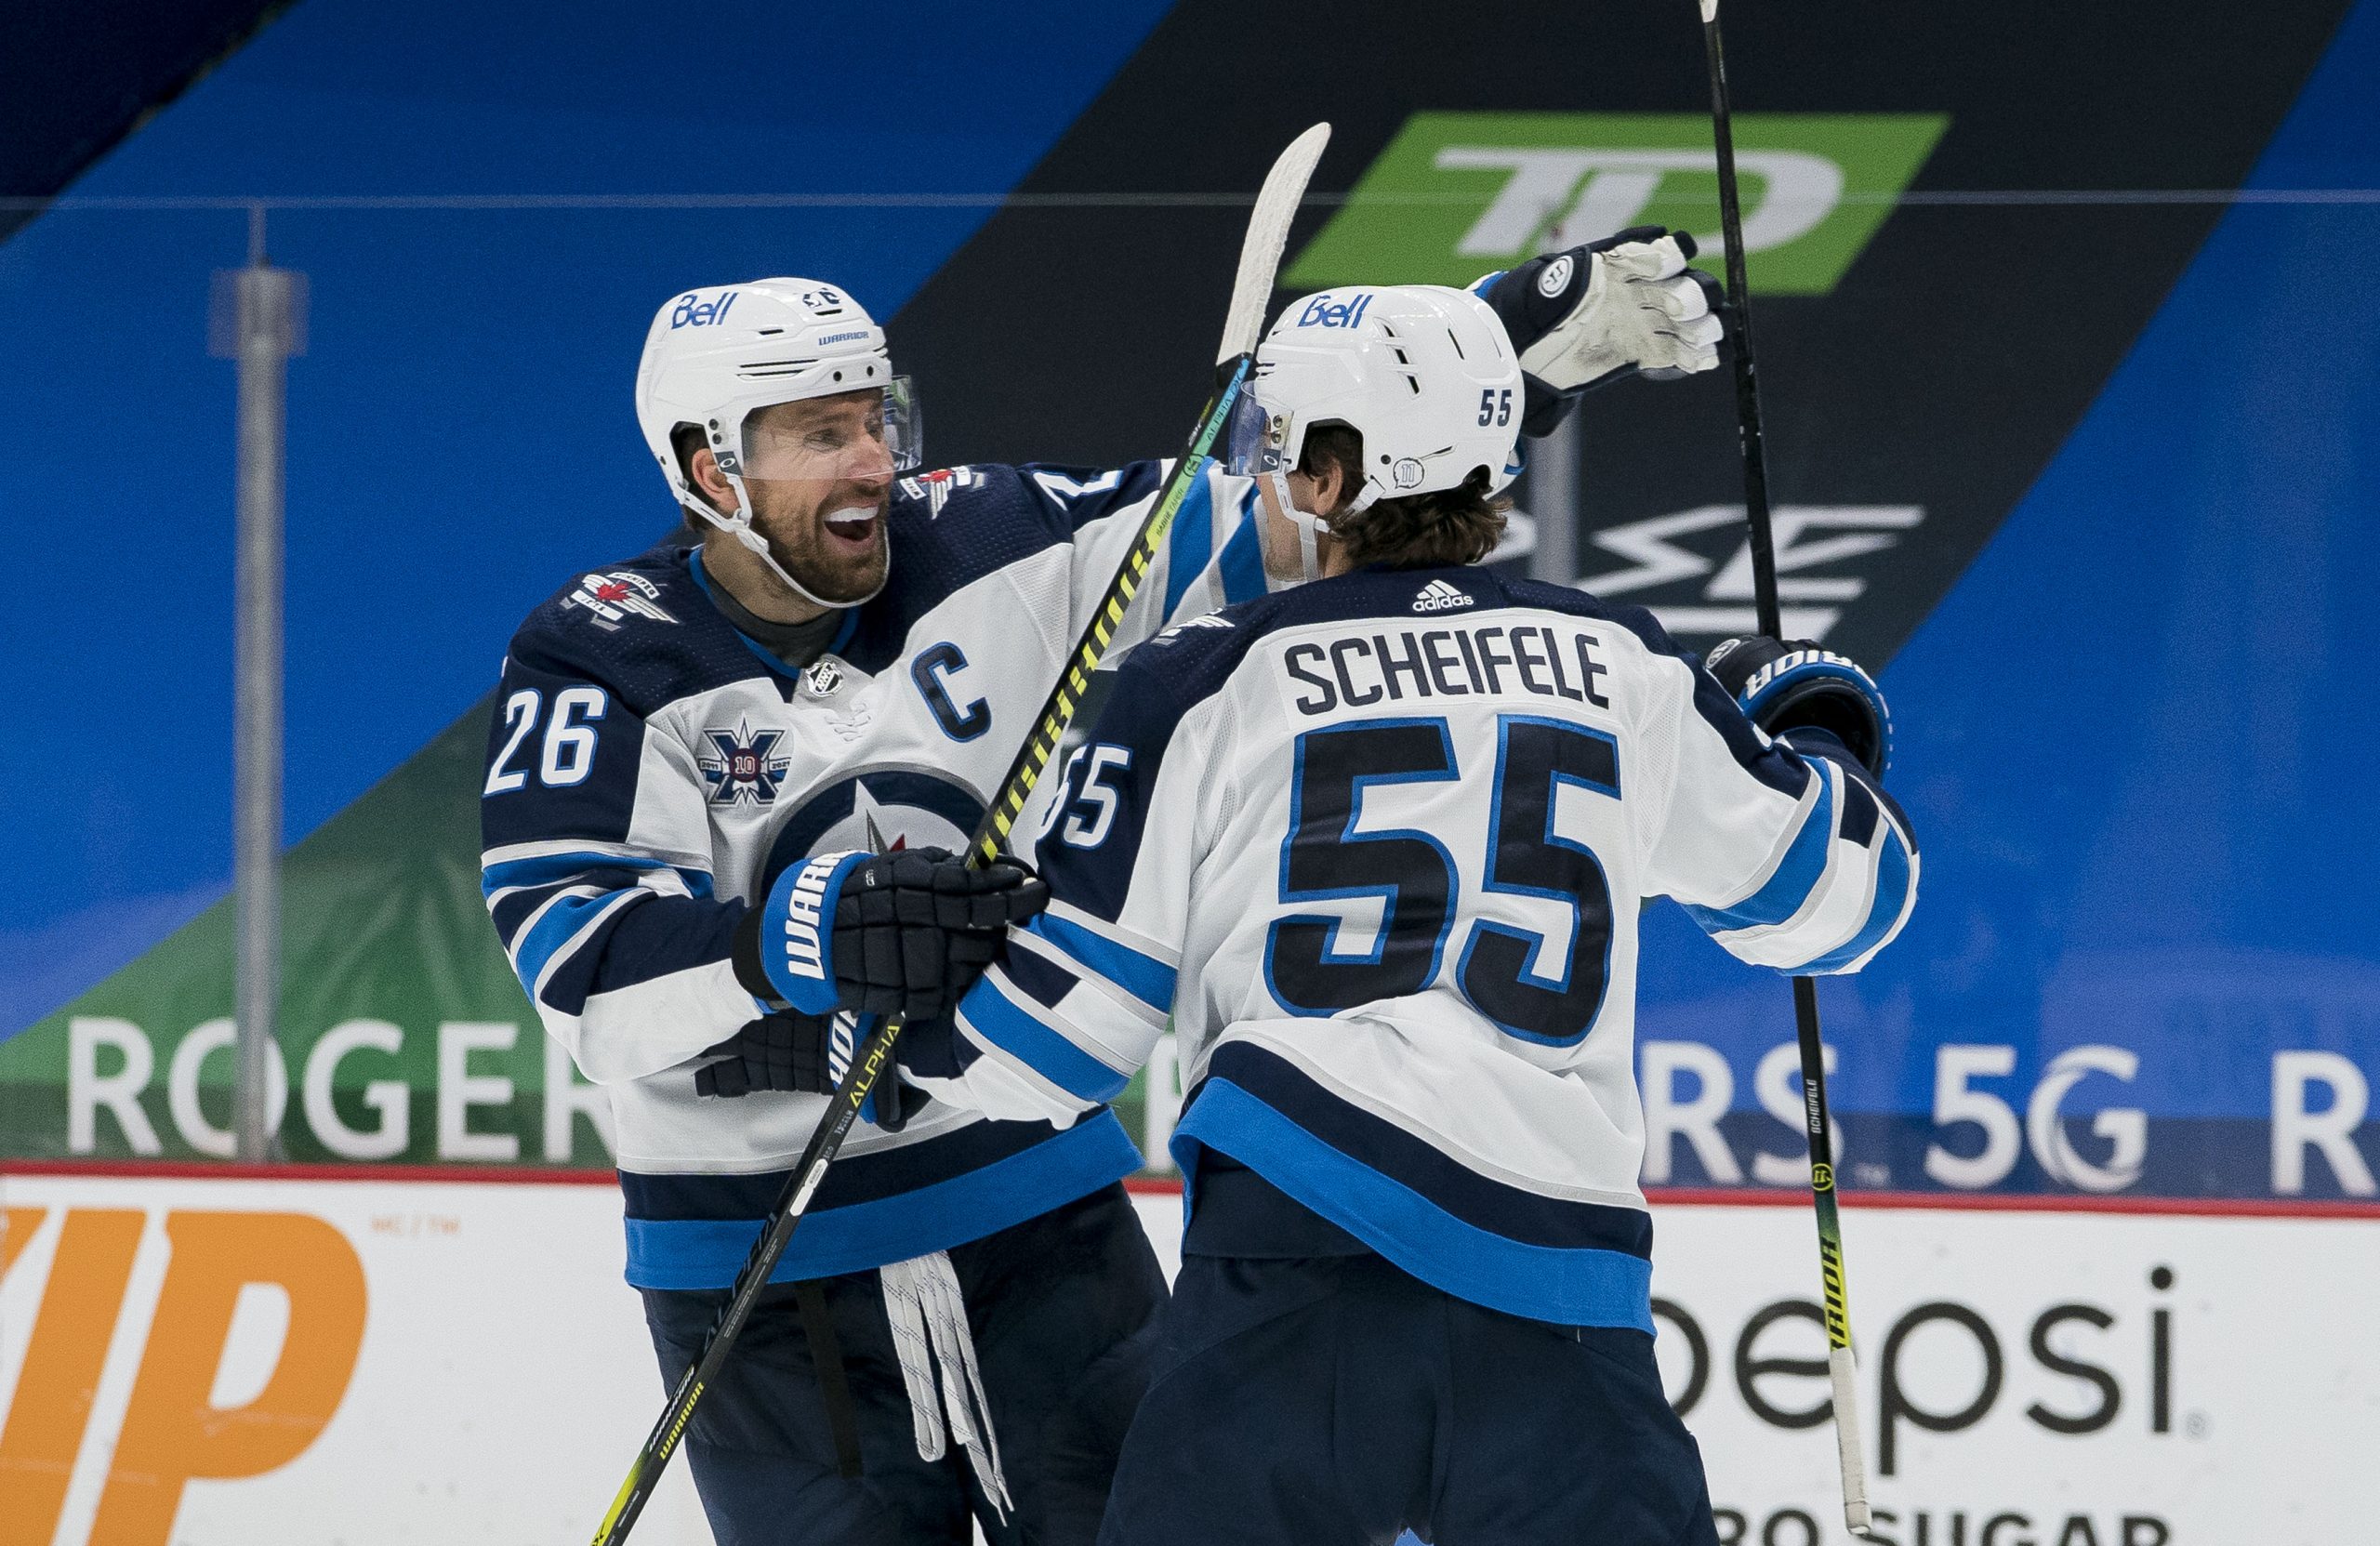 Feb 21, 2021; Vancouver, British Columbia, CAN; Winnipeg Jets forward Blake Wheeler (26) and forward Mark Scheifele (55) celebrate ScheifeleÕs goal against the Vancouver Canucks in the third period at Rogers Arena. Jets won 4-3 in Overtime.